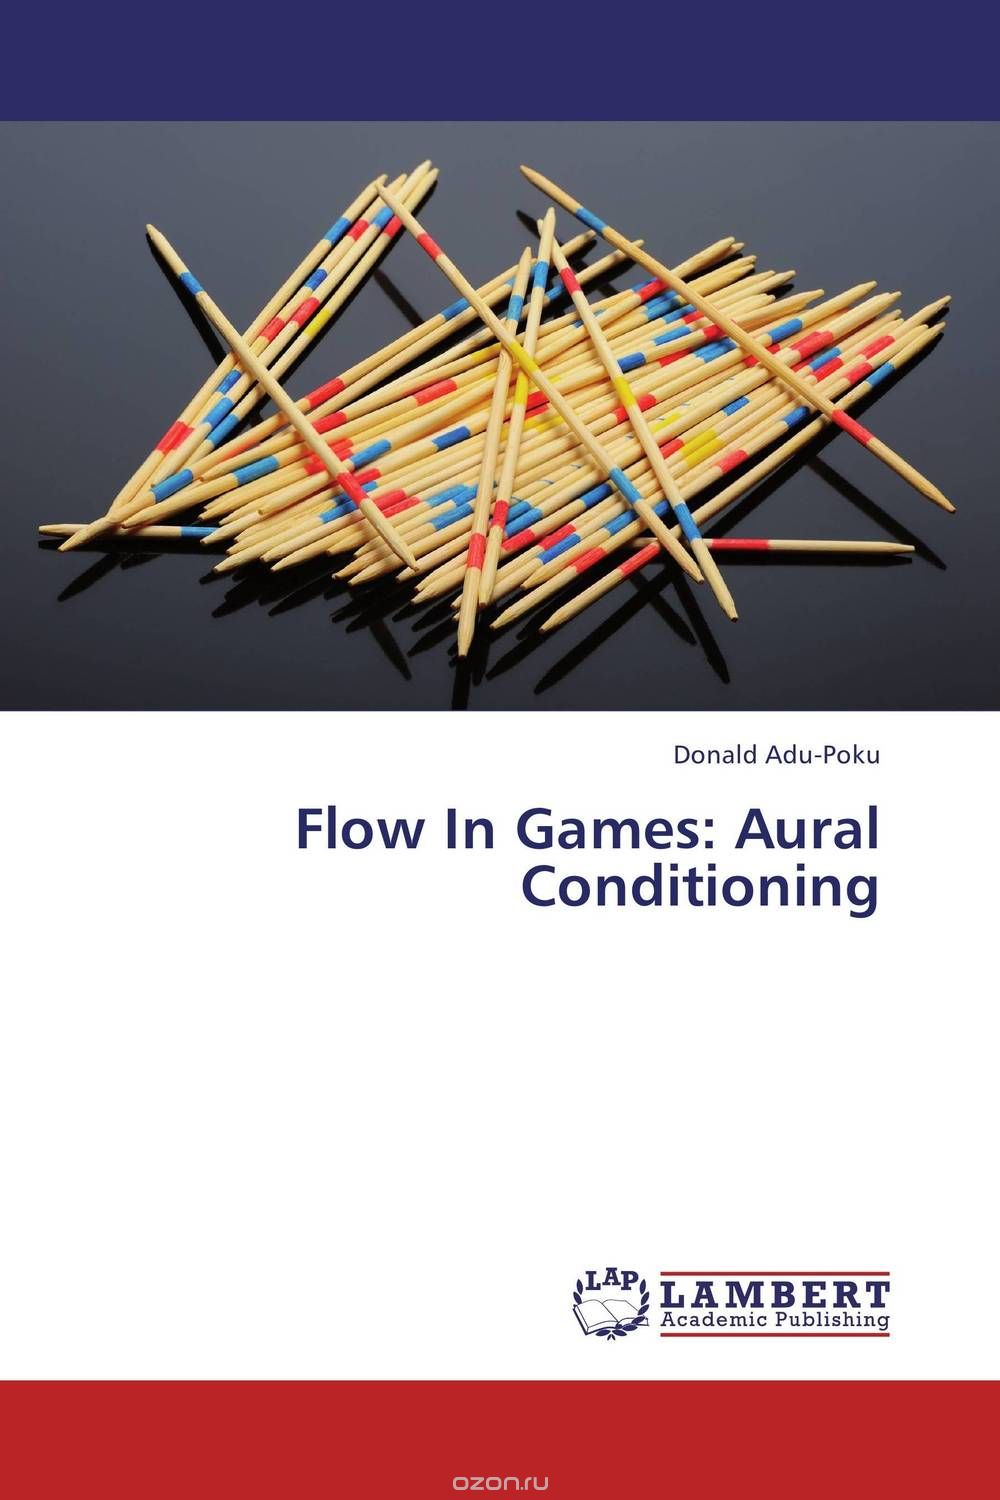 Flow In Games: Aural Conditioning